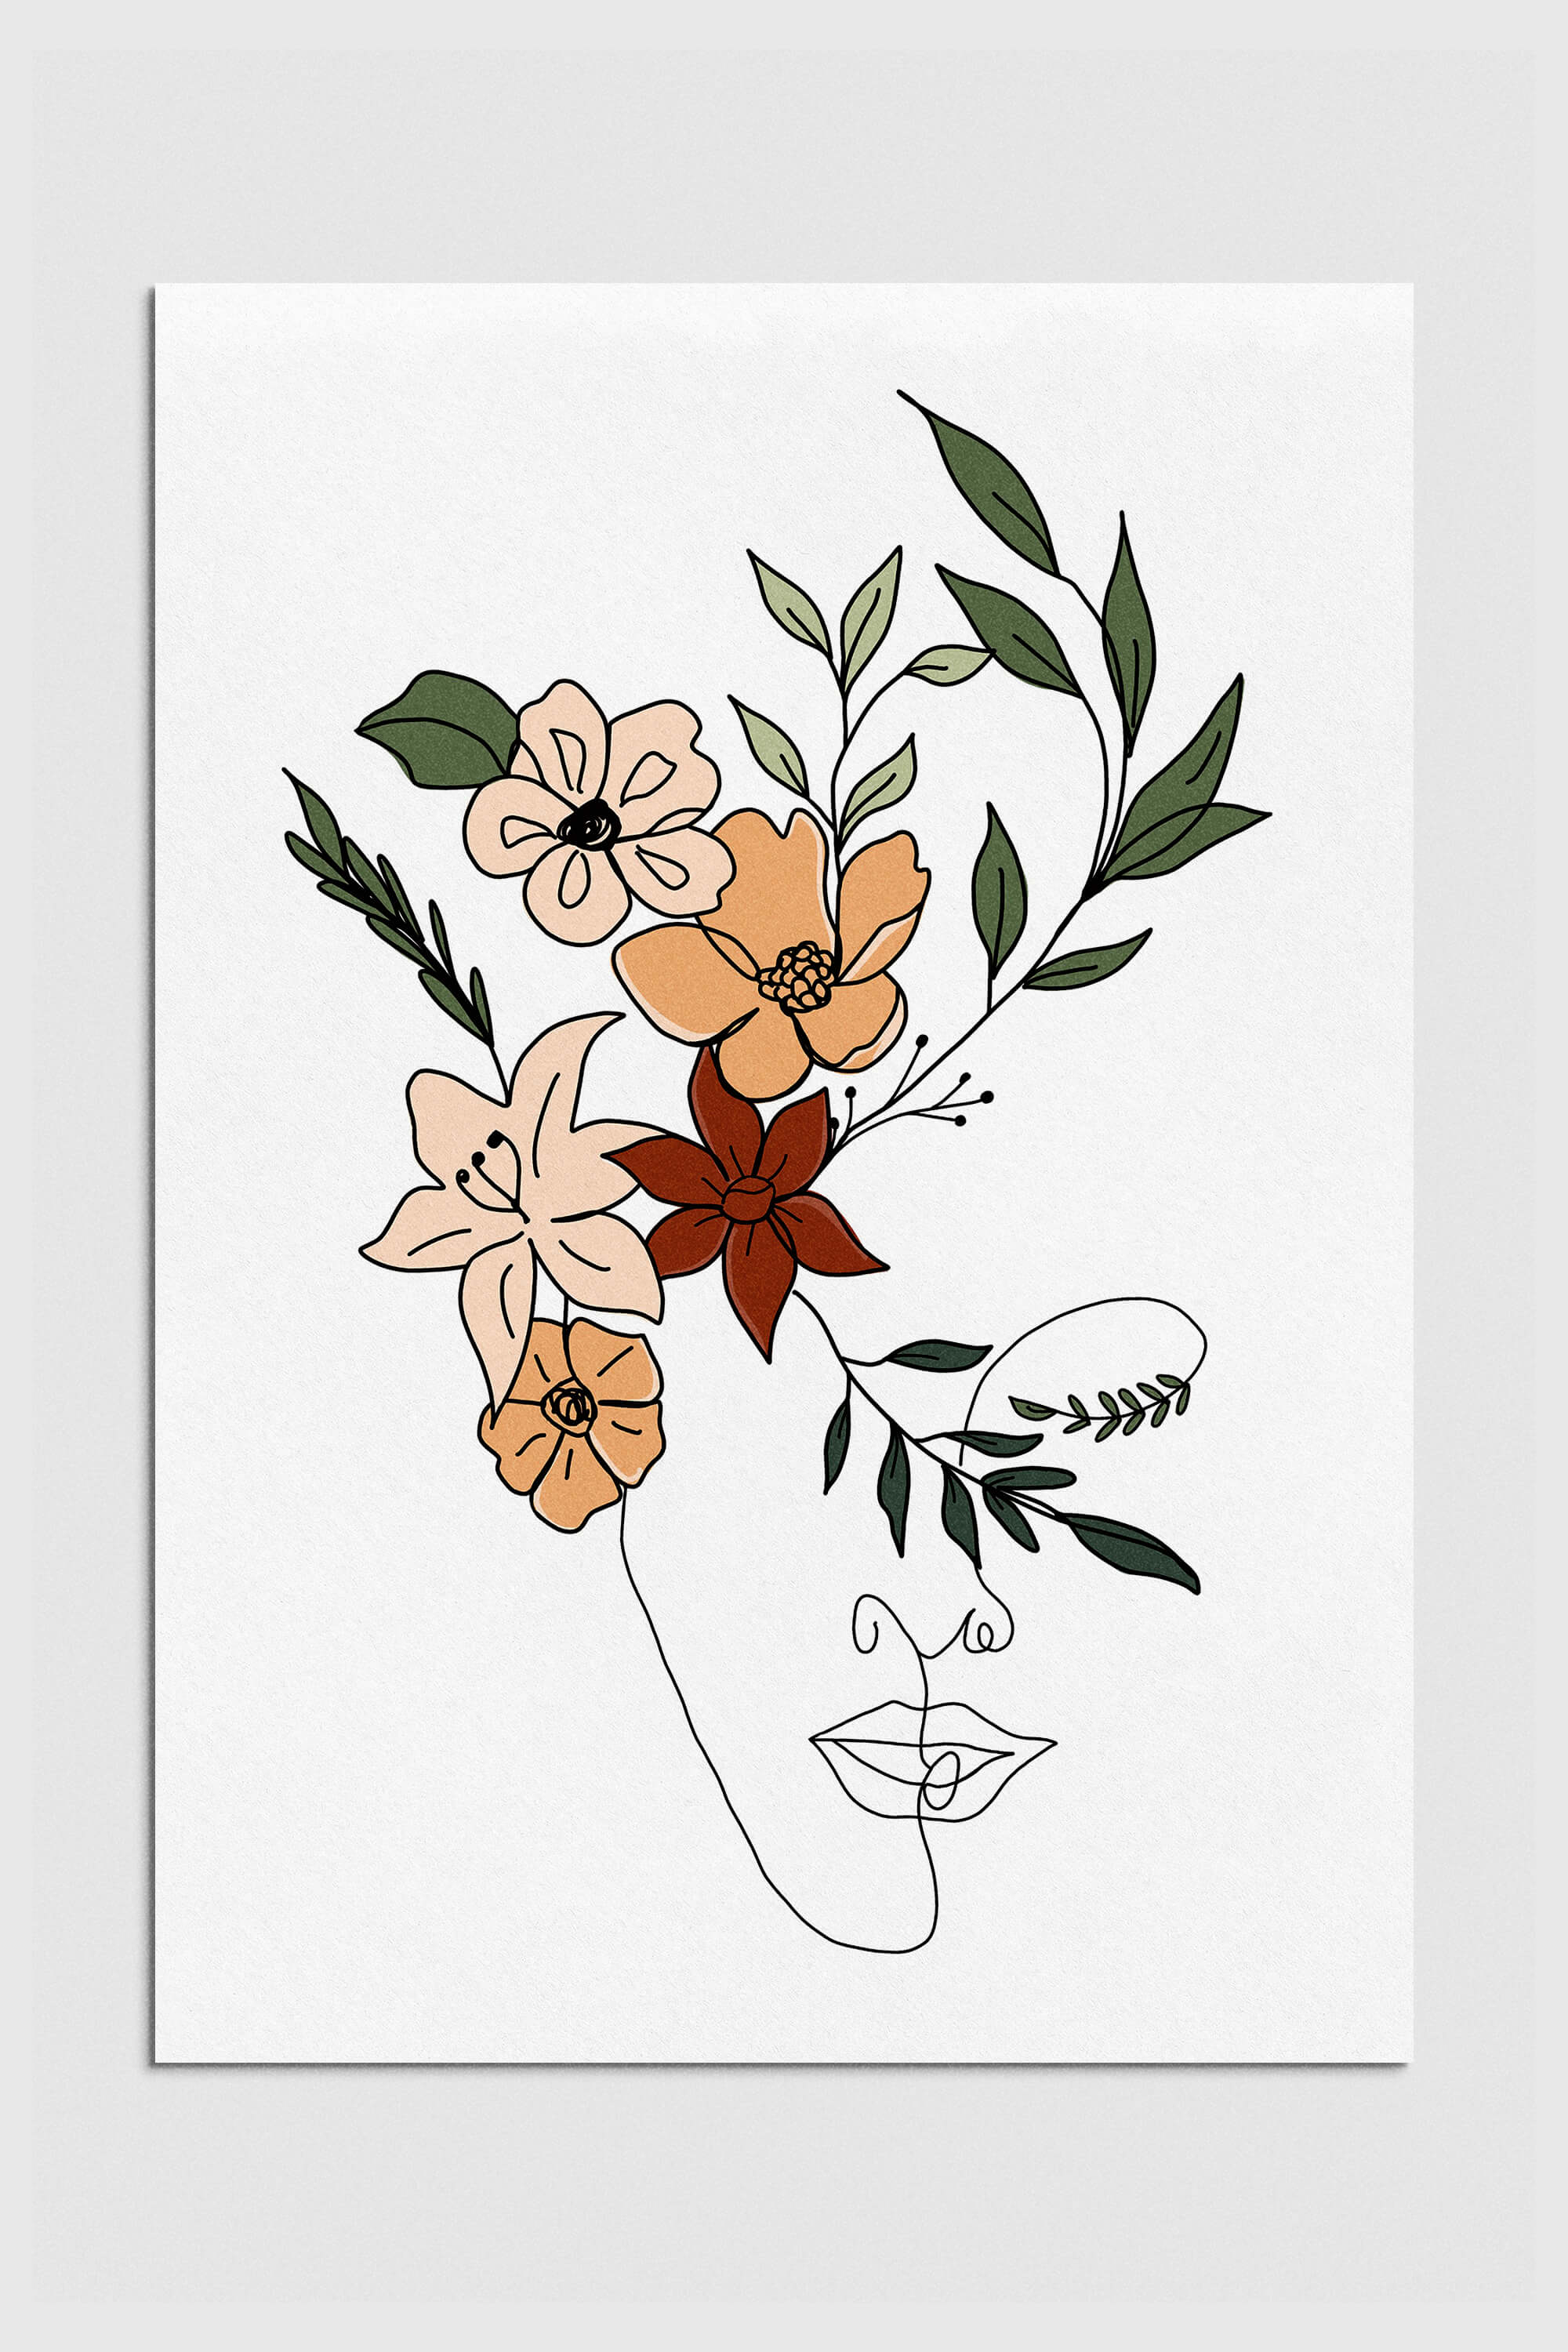 Abstract Flower Face Woman Art Poster in modern home decor setting, showcasing intricate floral and feminine design.